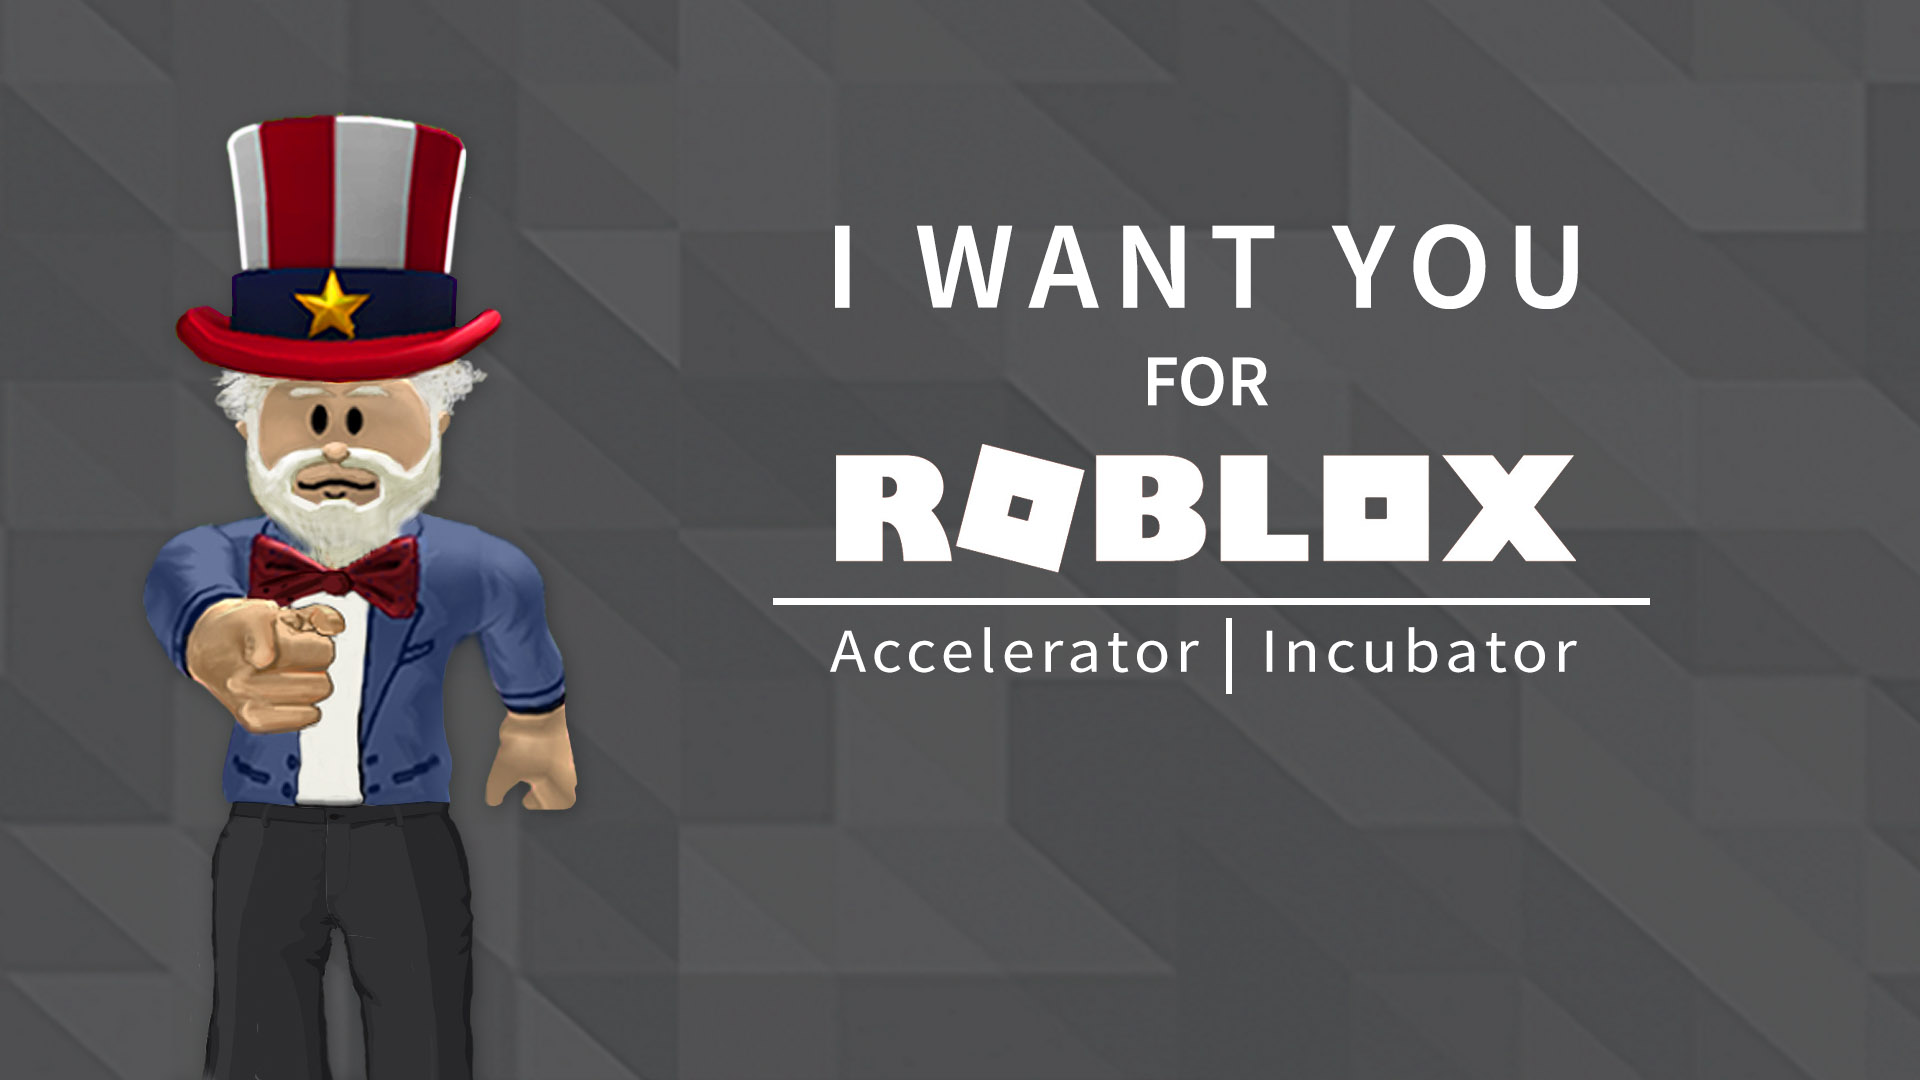 Apply To Be A Roblox Accelerator Or Incubator Today Roblox Blog